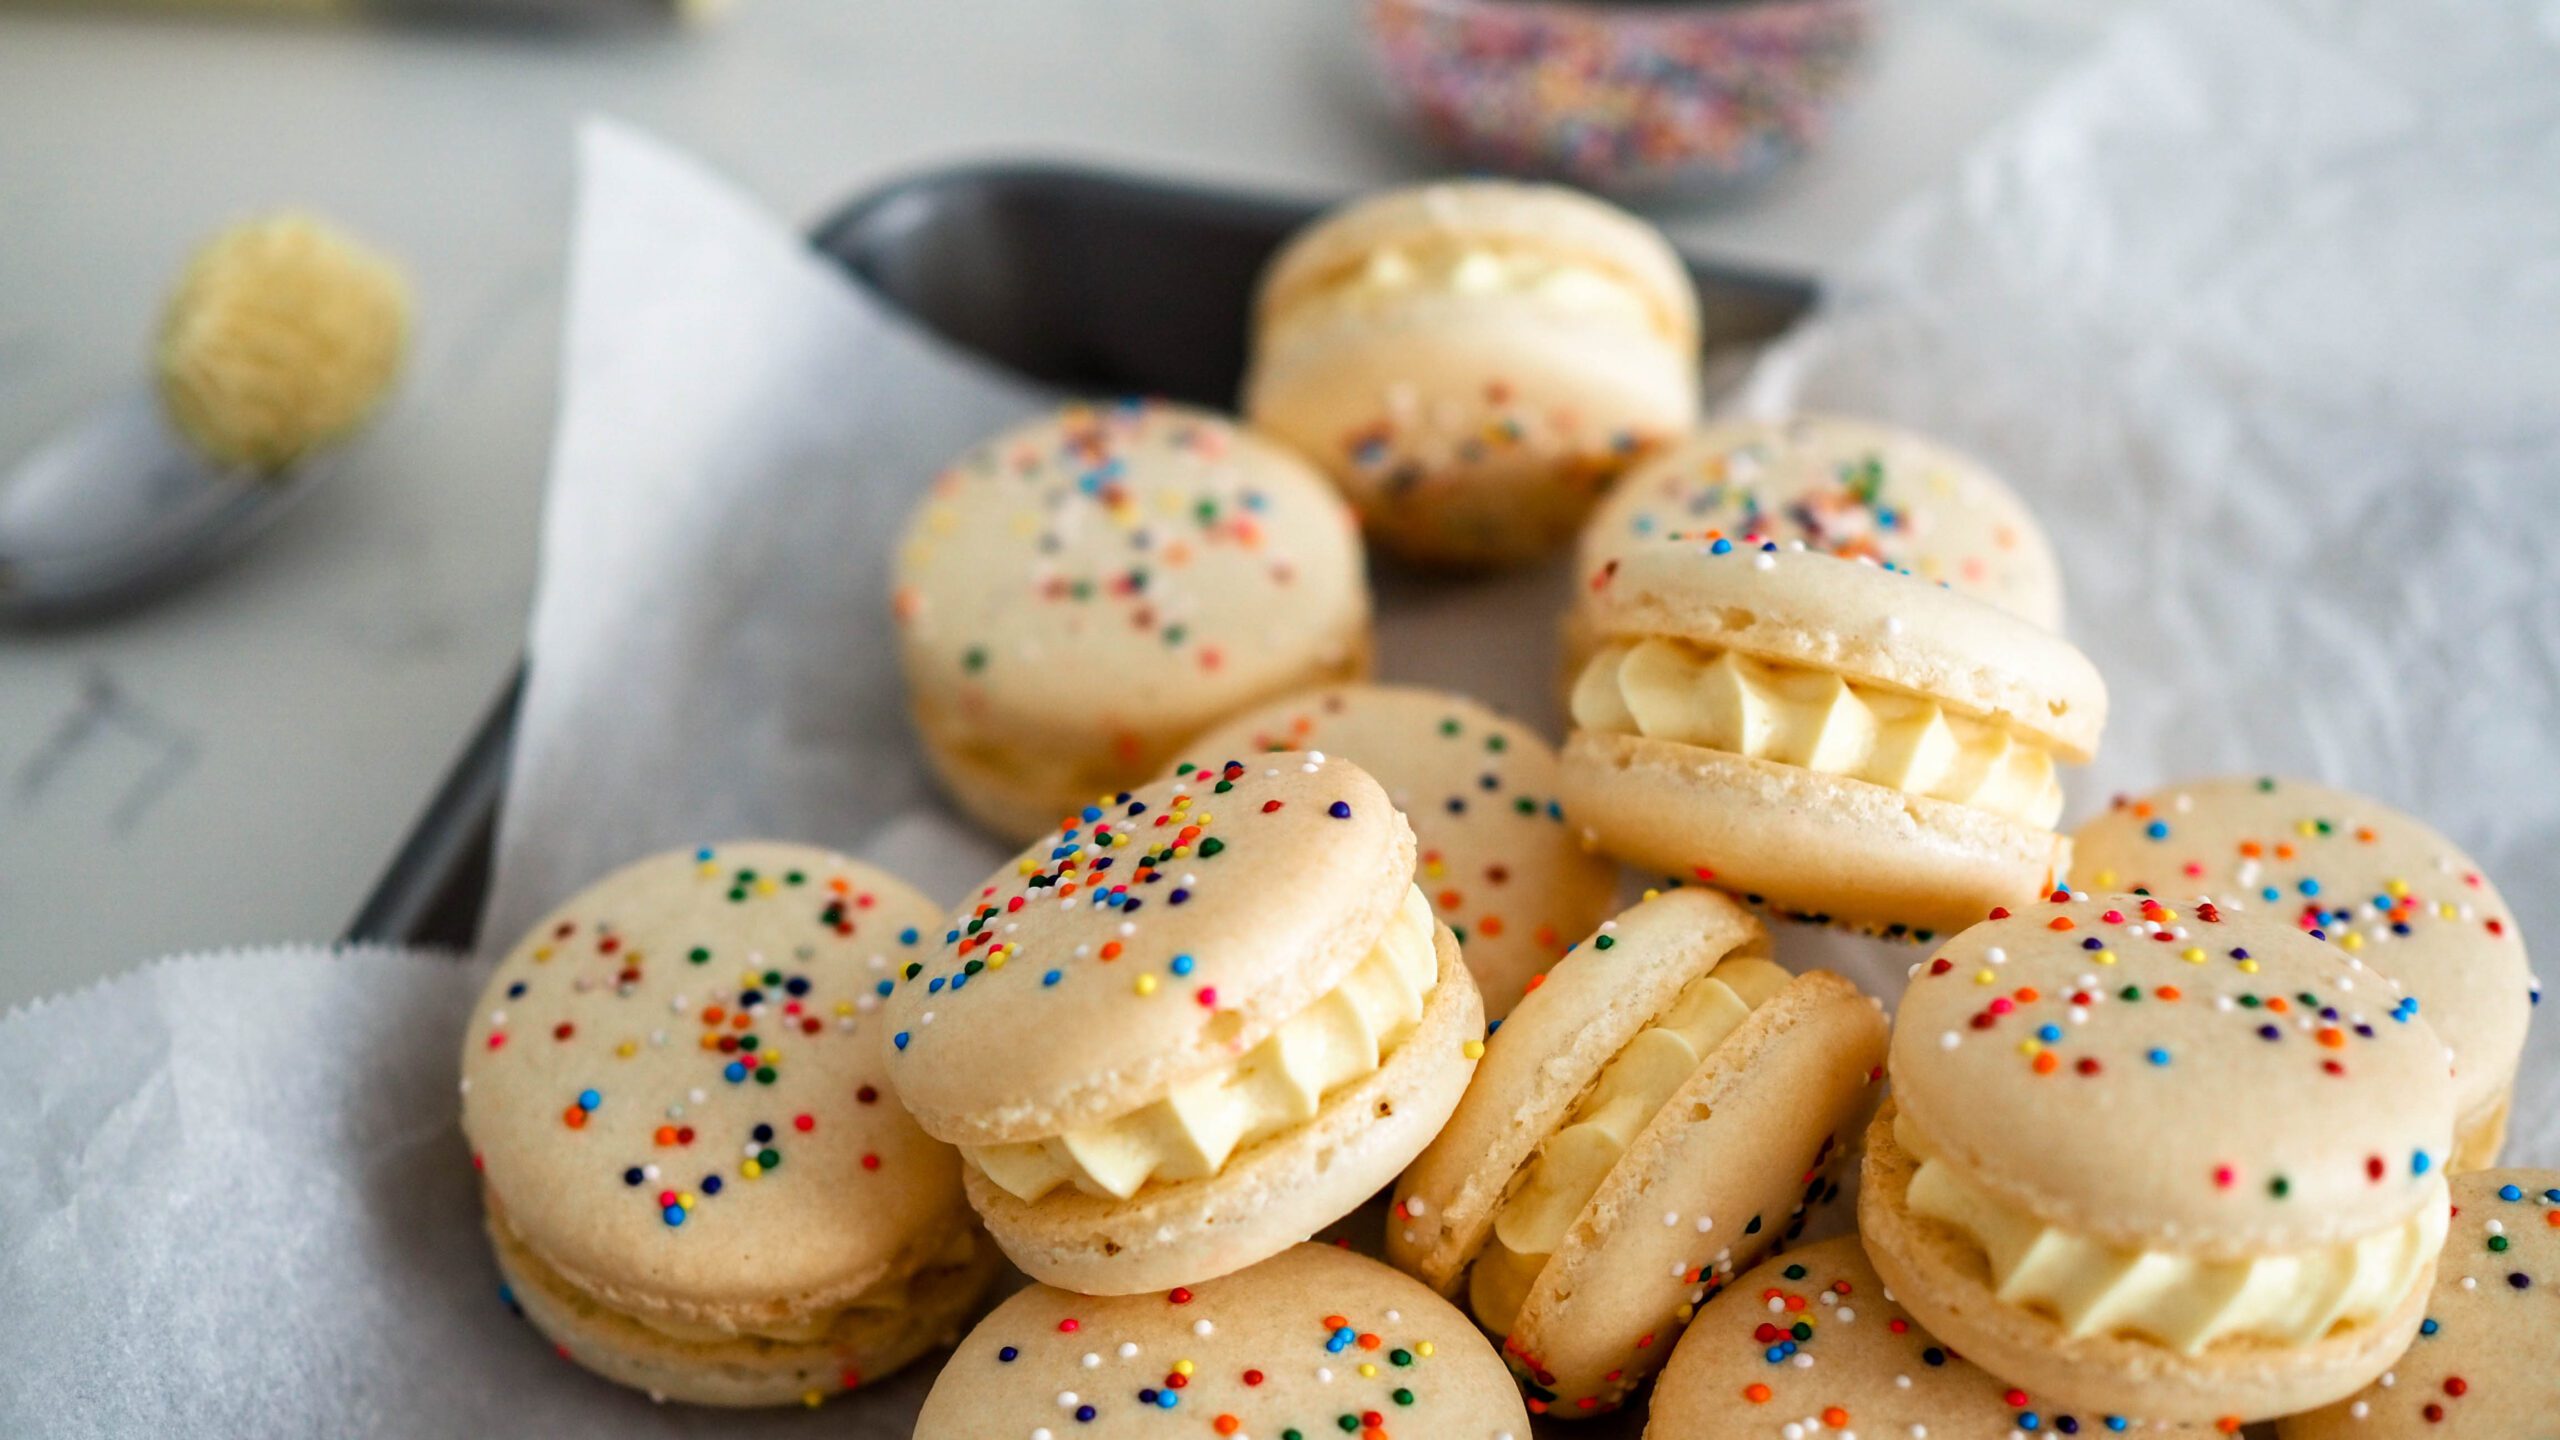 A pile of birthday cake macarons topped with sprinkles.